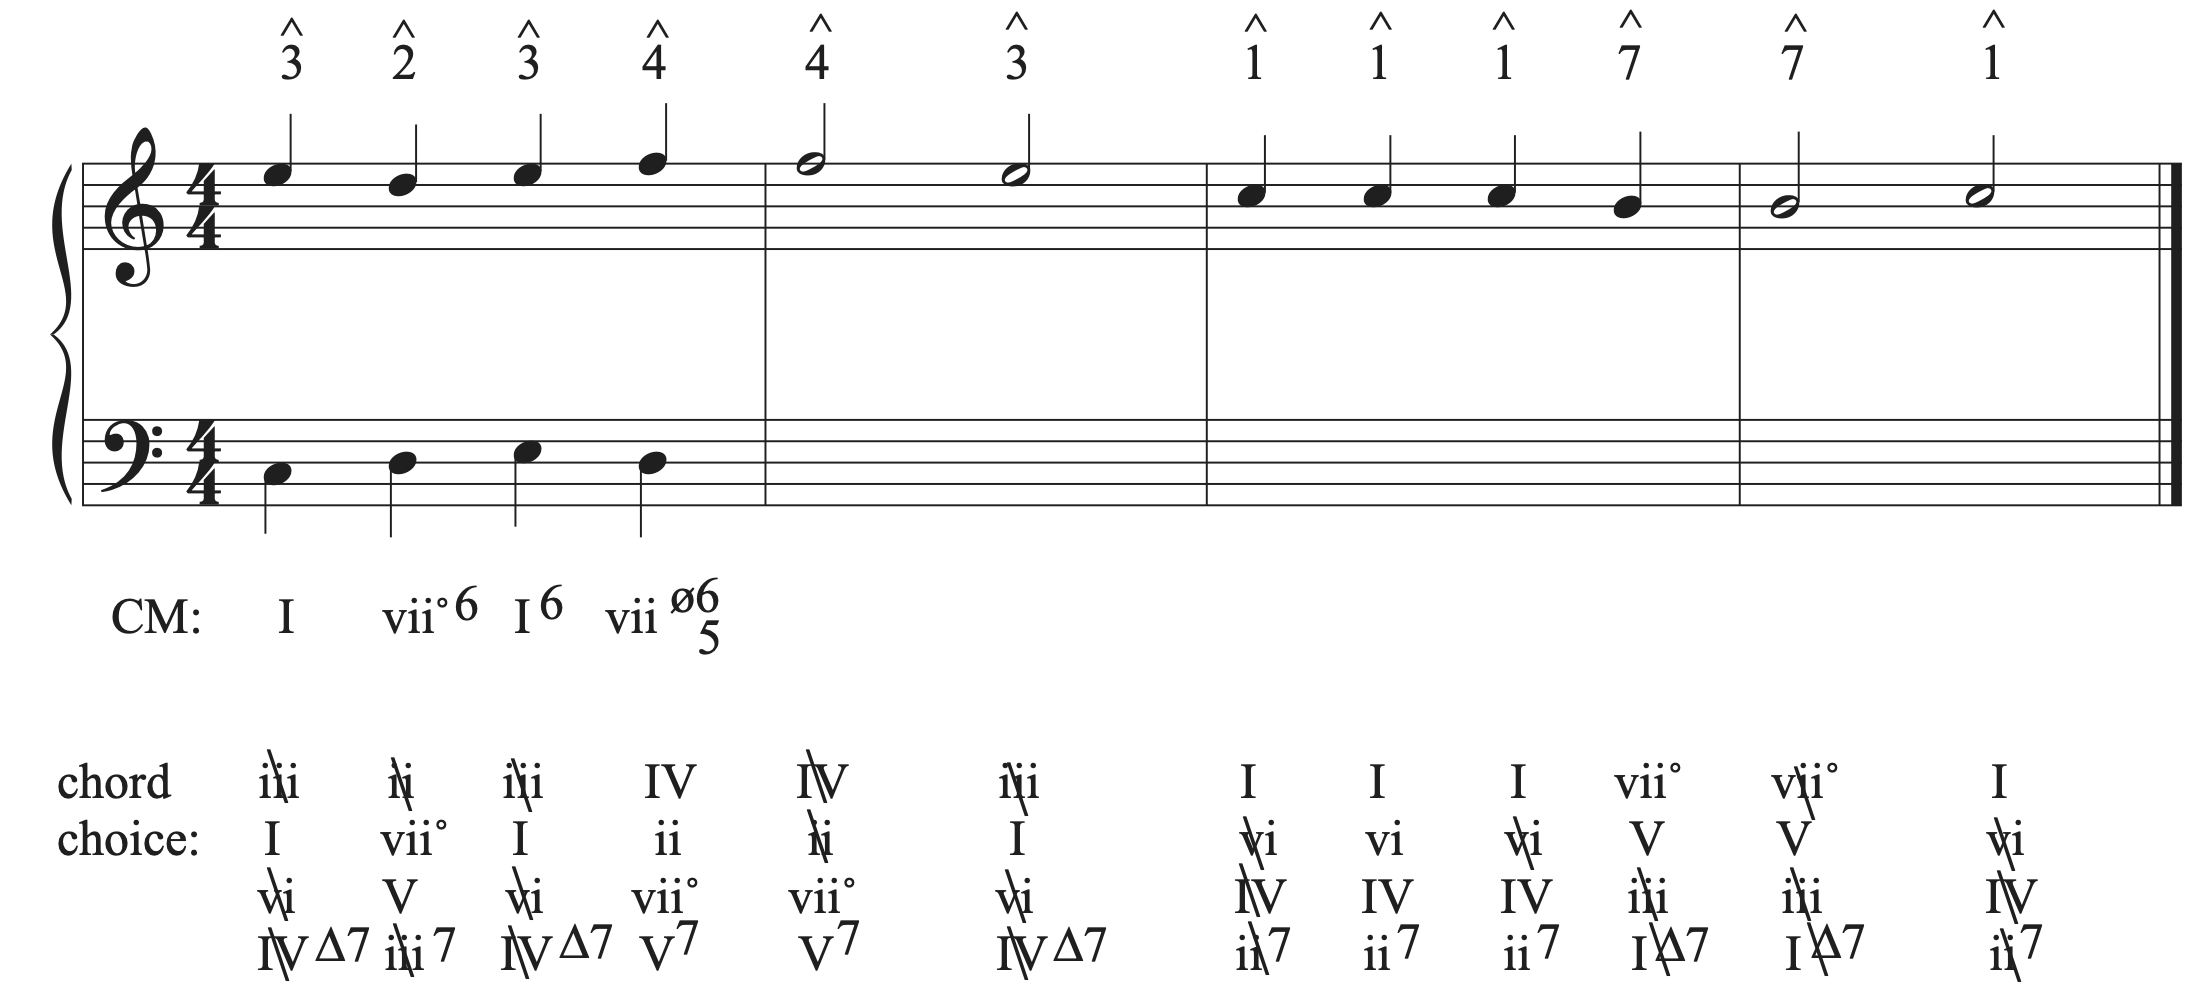 The musical example in C major with bar 1 progression and bass line added.